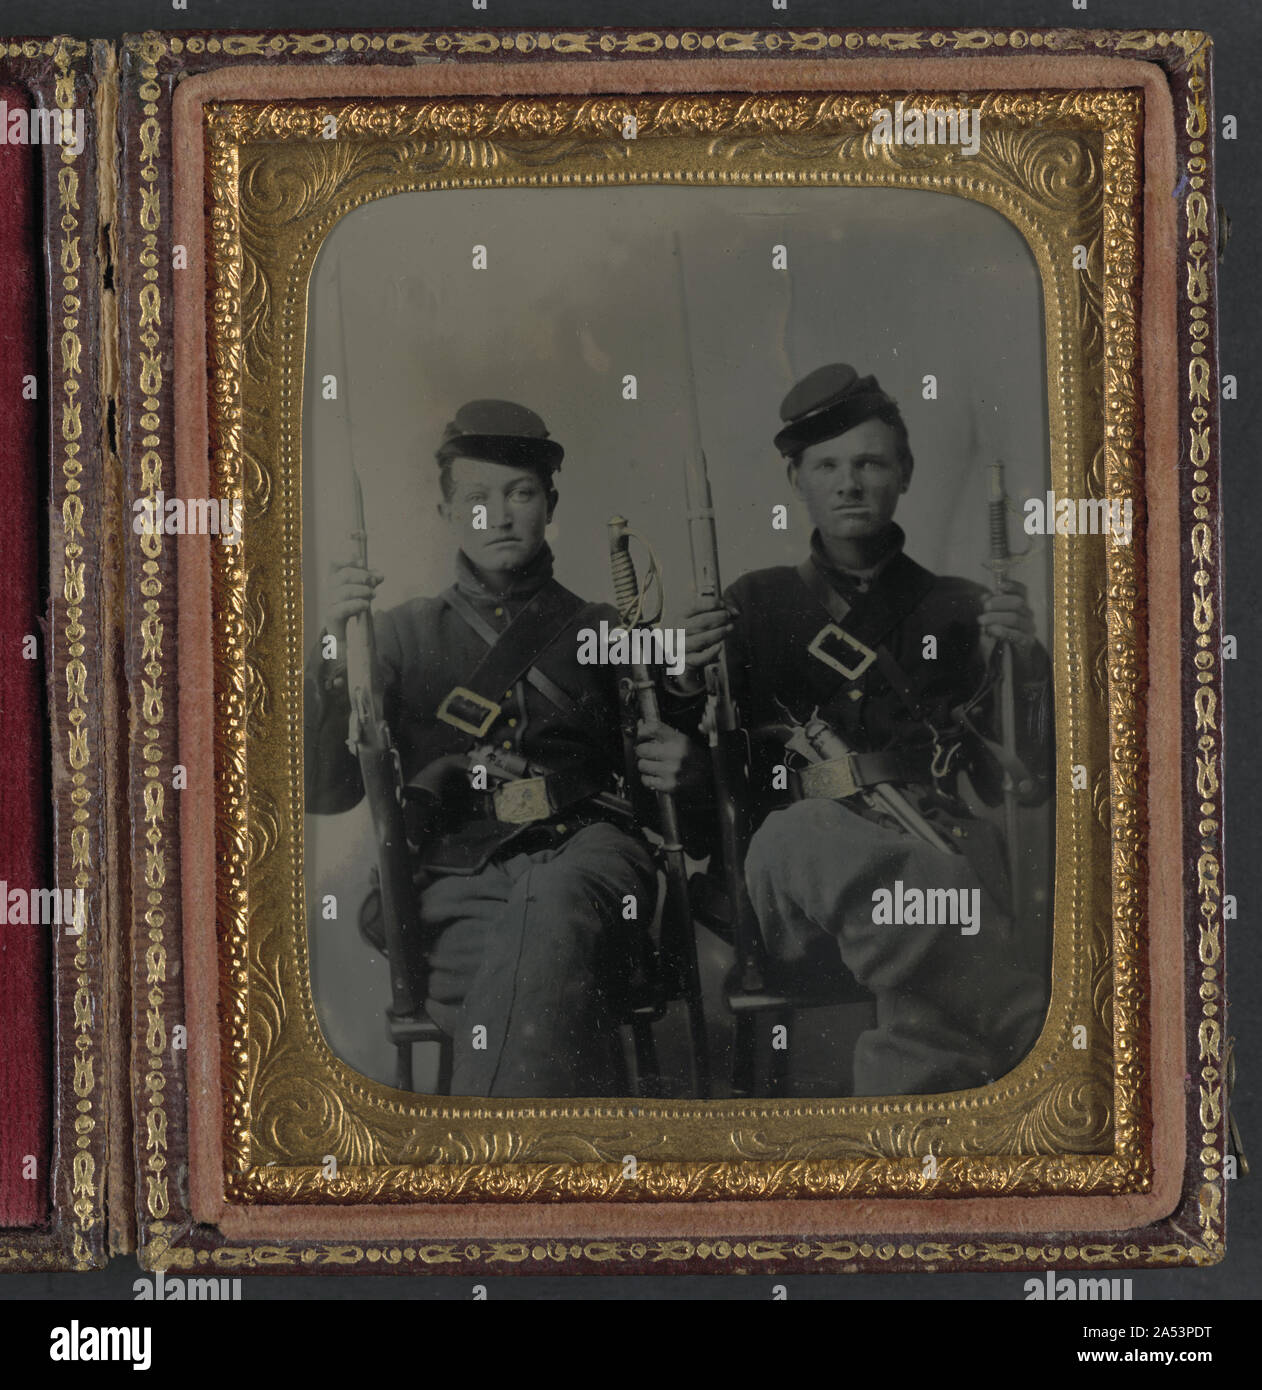 Two unidentified soldiers with Spencer carbines, 1860 sabers, and Colt Army revolvers, probably Union uniforms Stock Photo